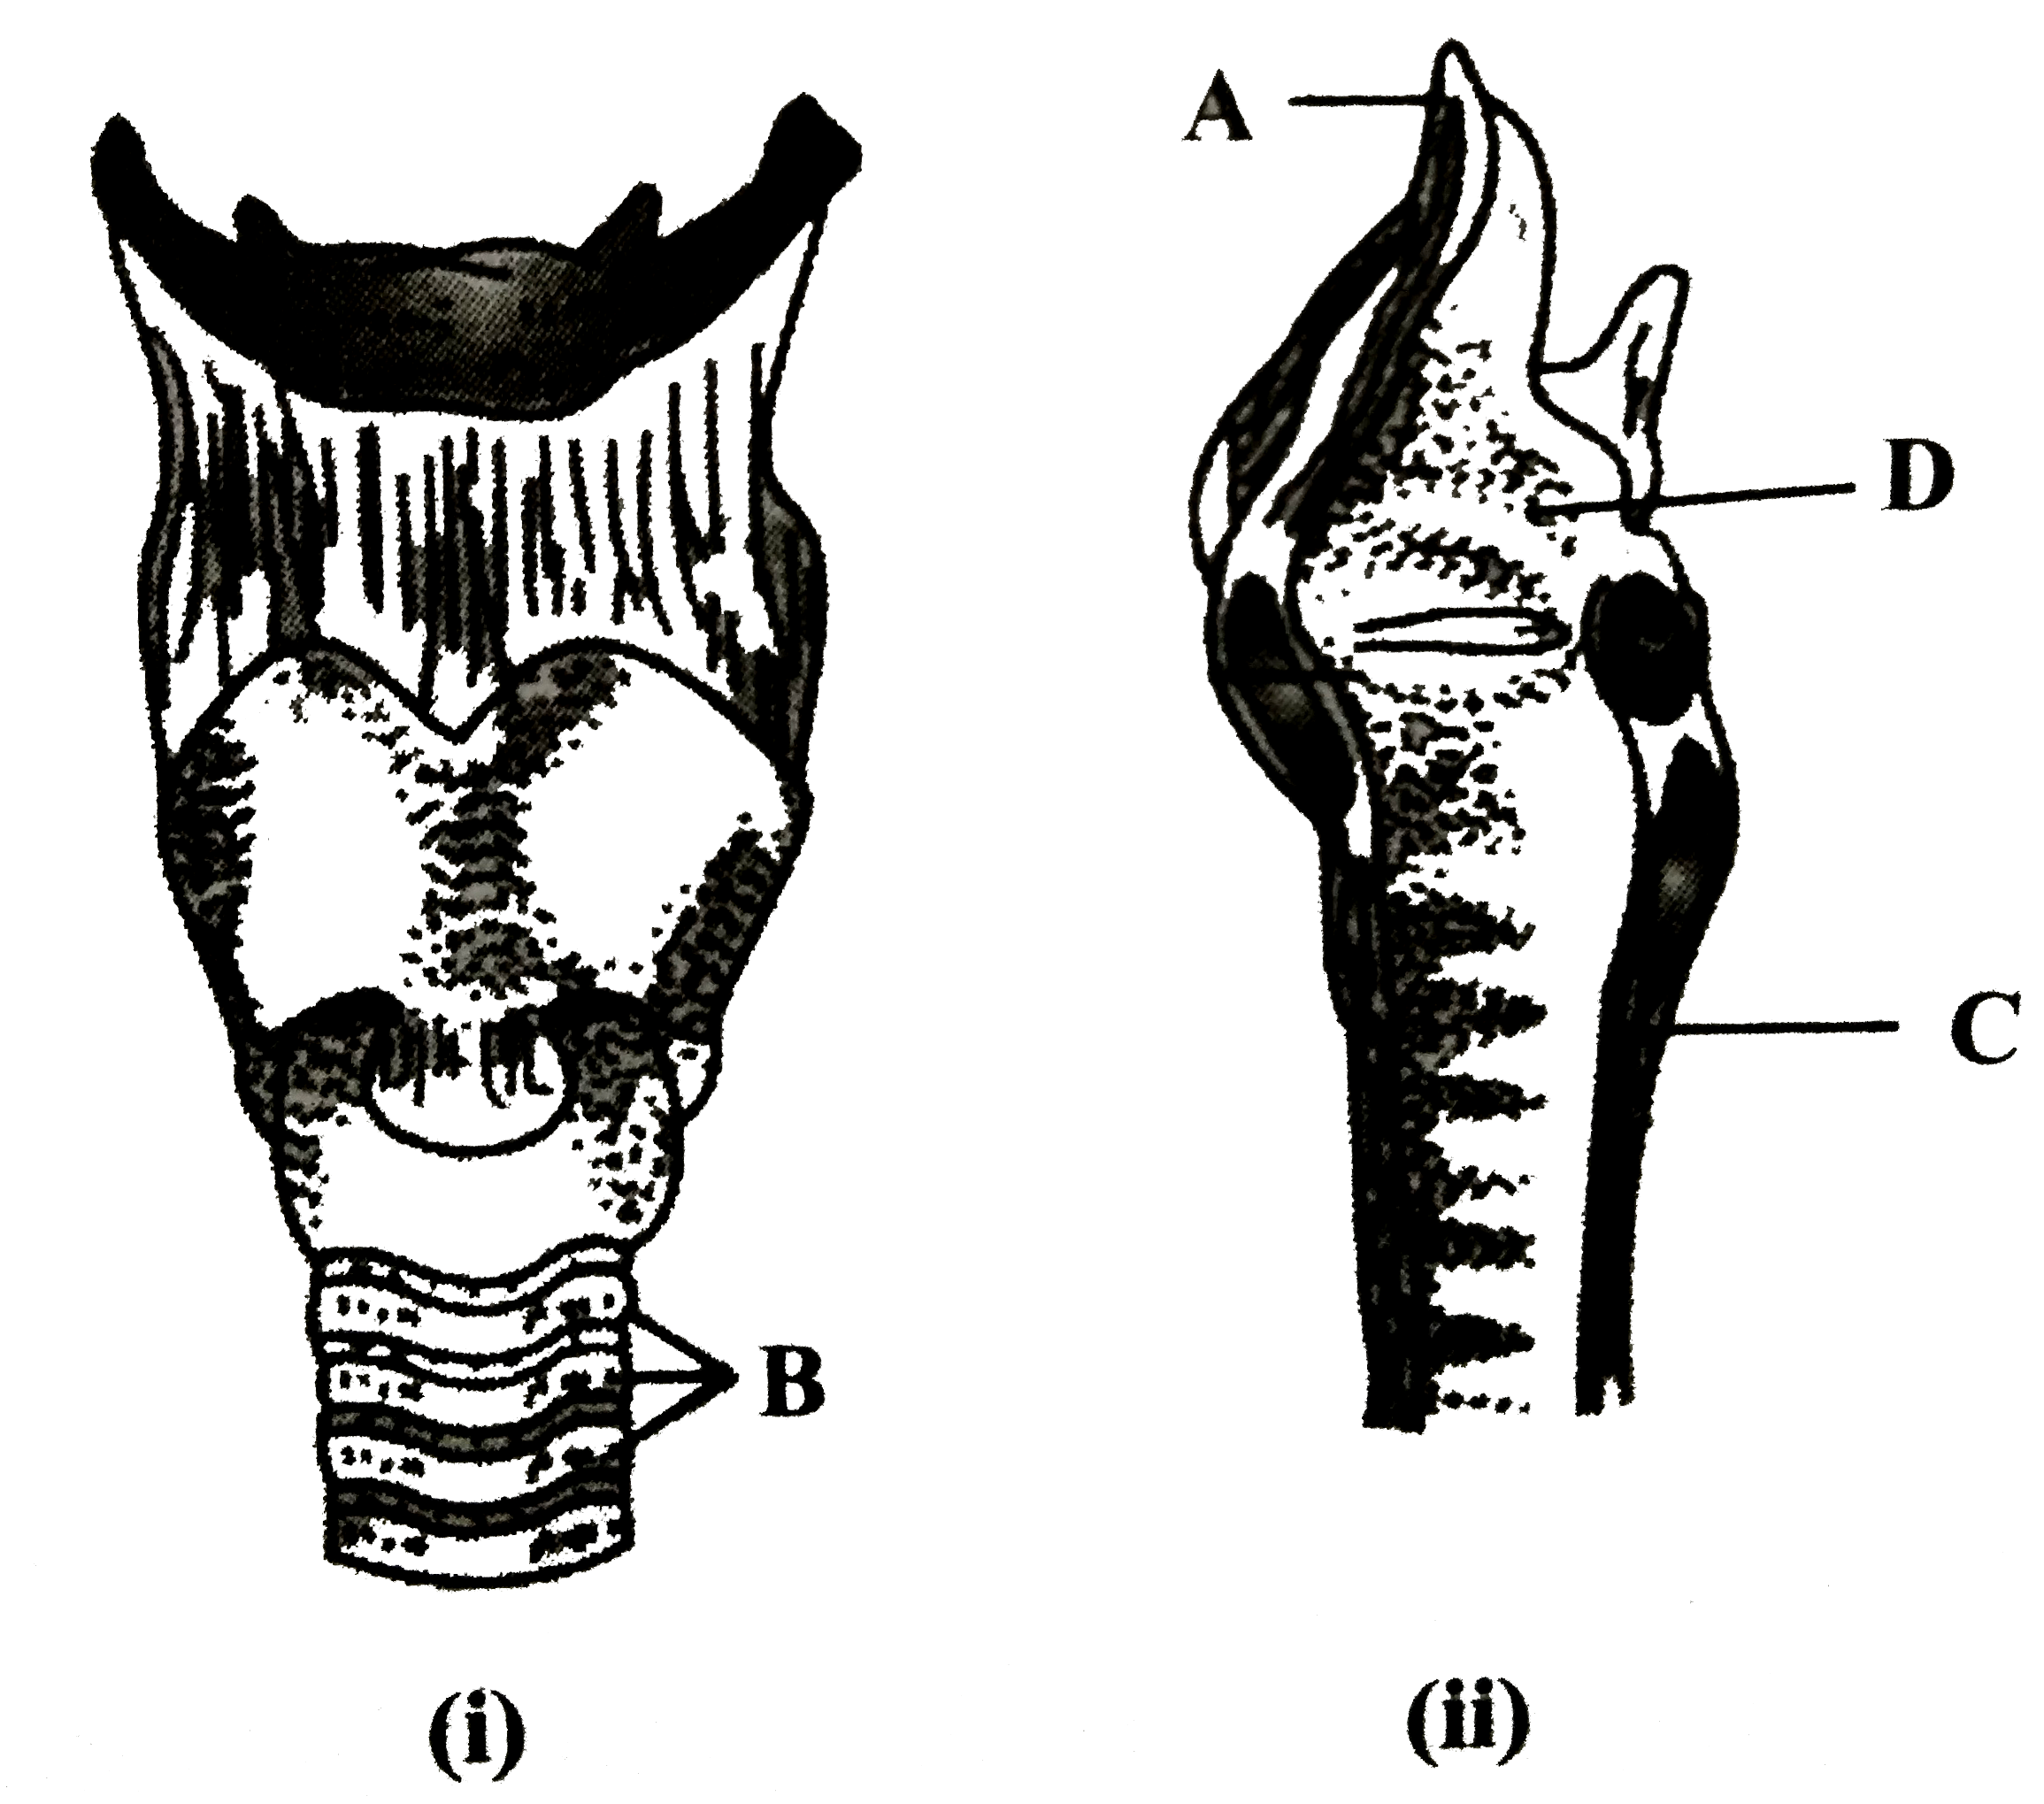 The given figures are of human larynx, front view (i) and vertical section (ii).      Identify the labelled parts A to D.